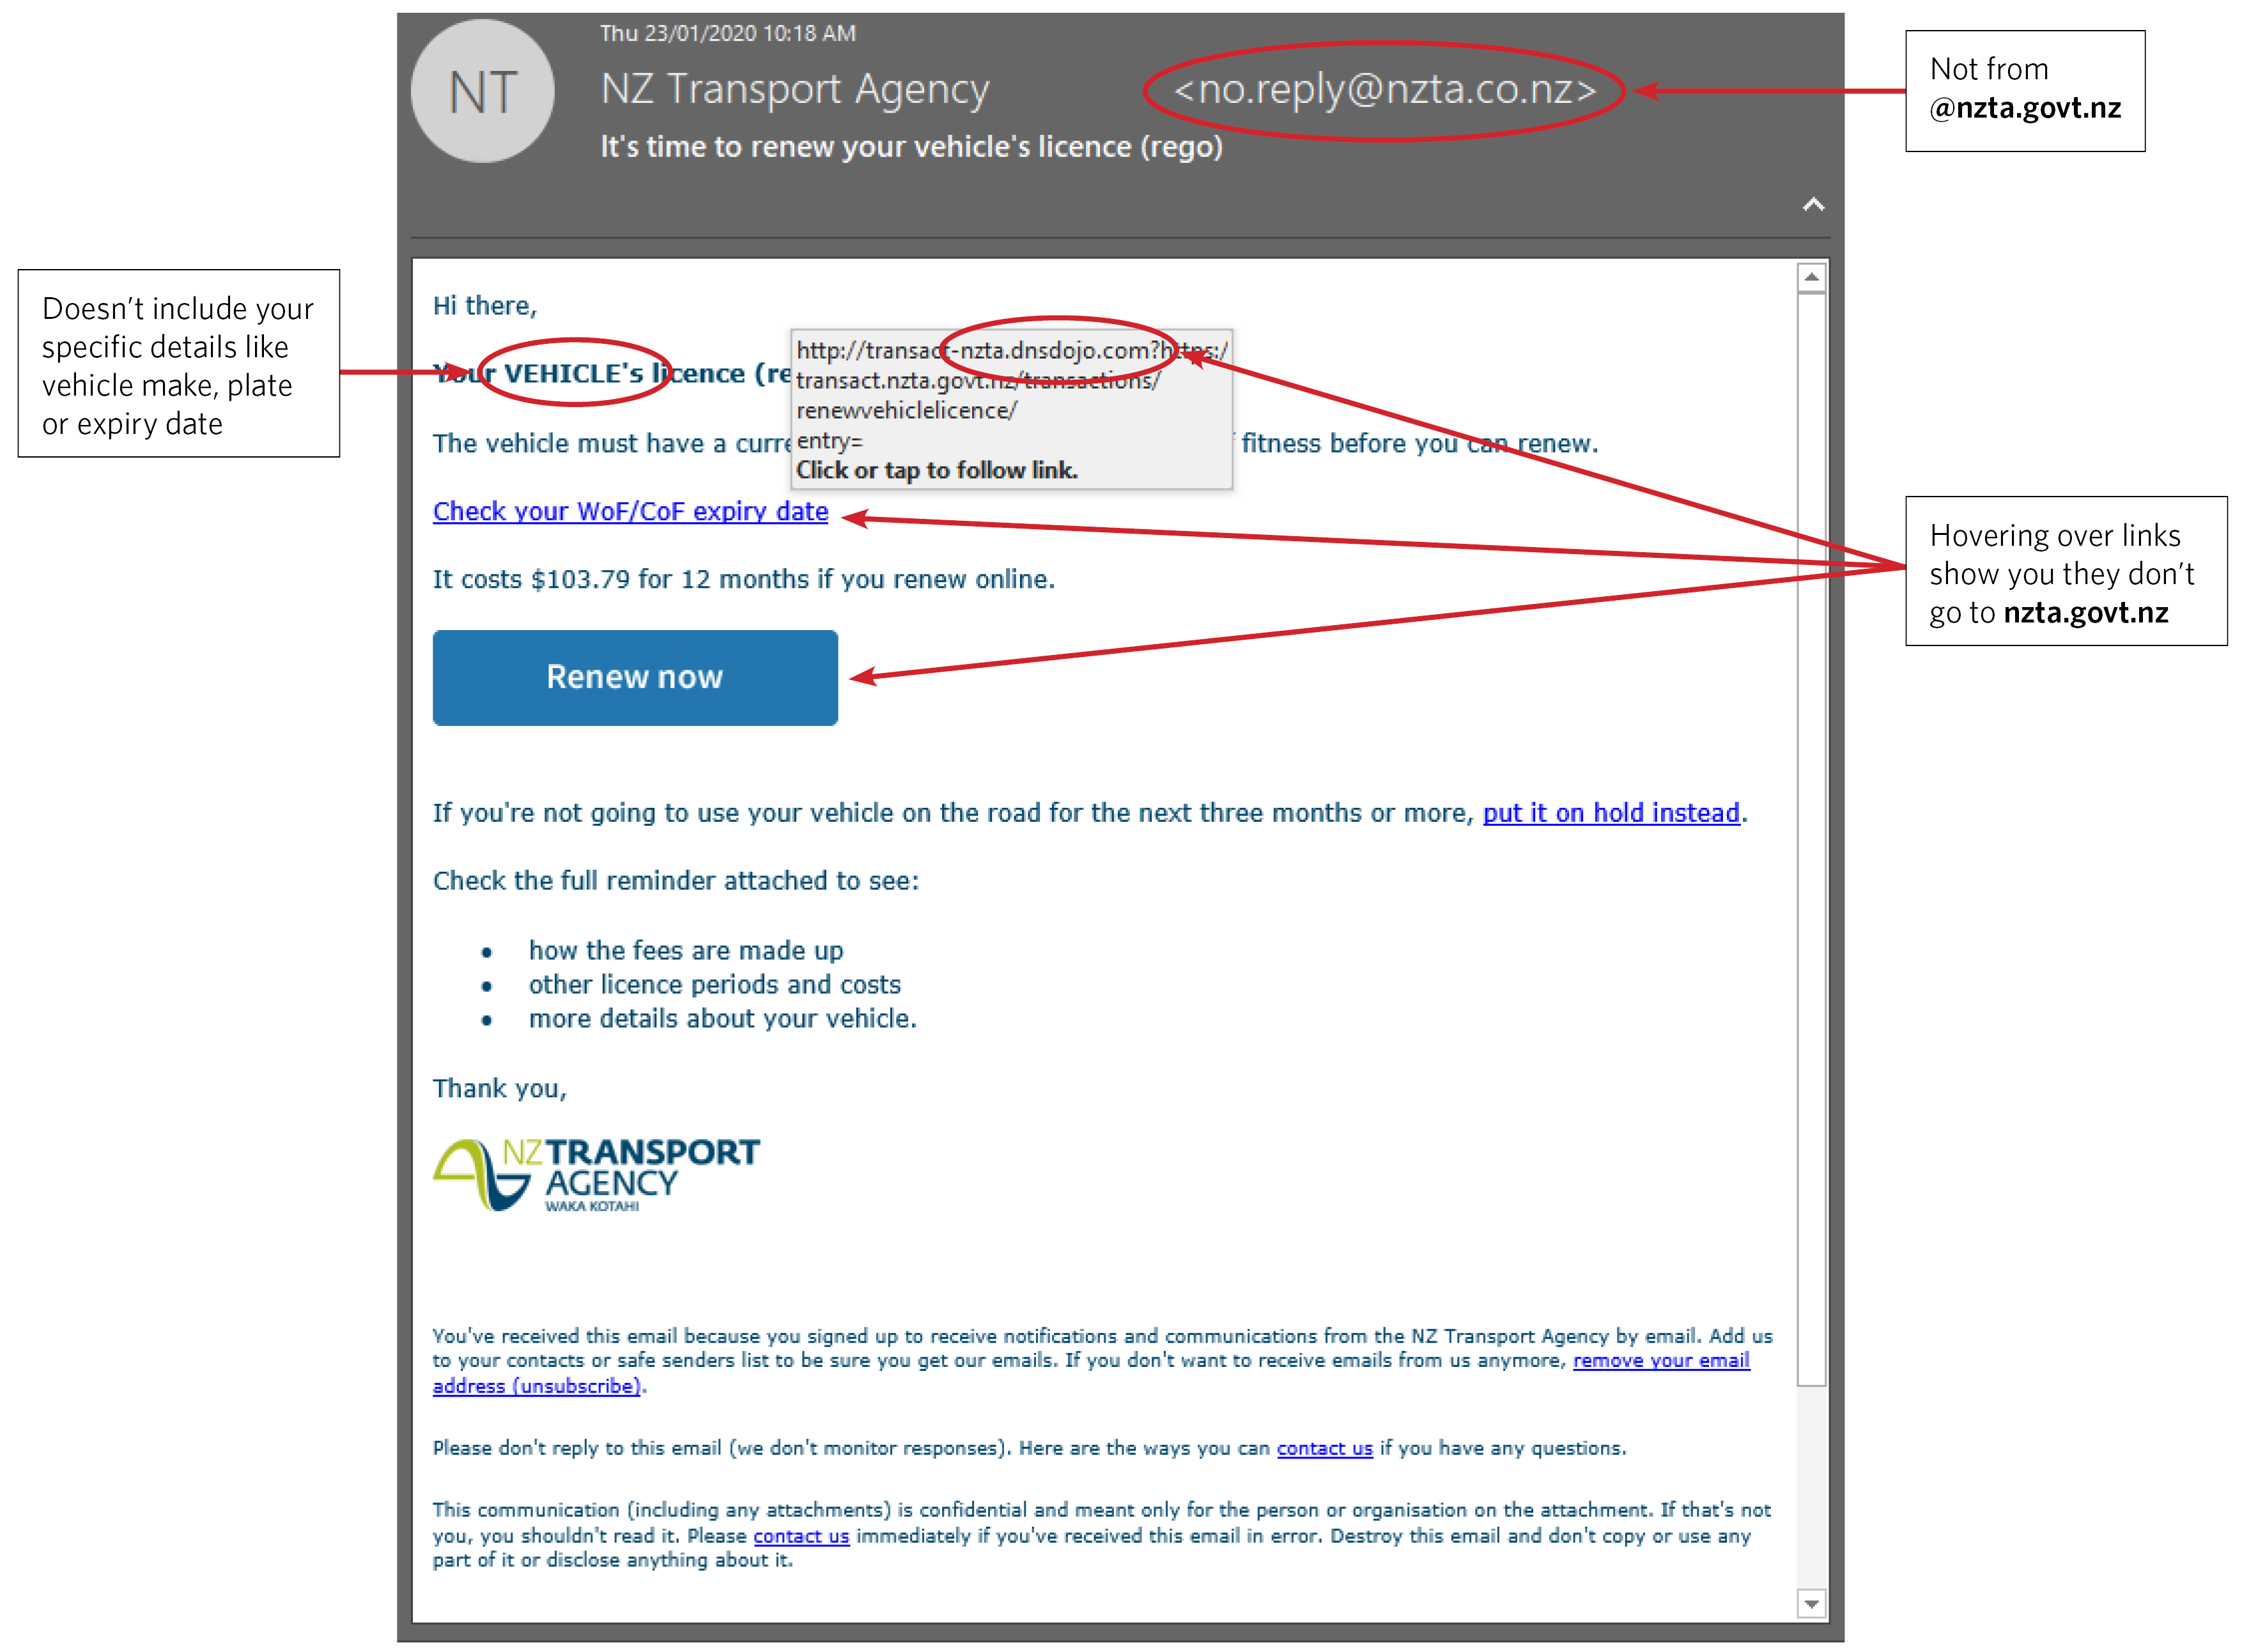 An example of a vehicle licence email scam